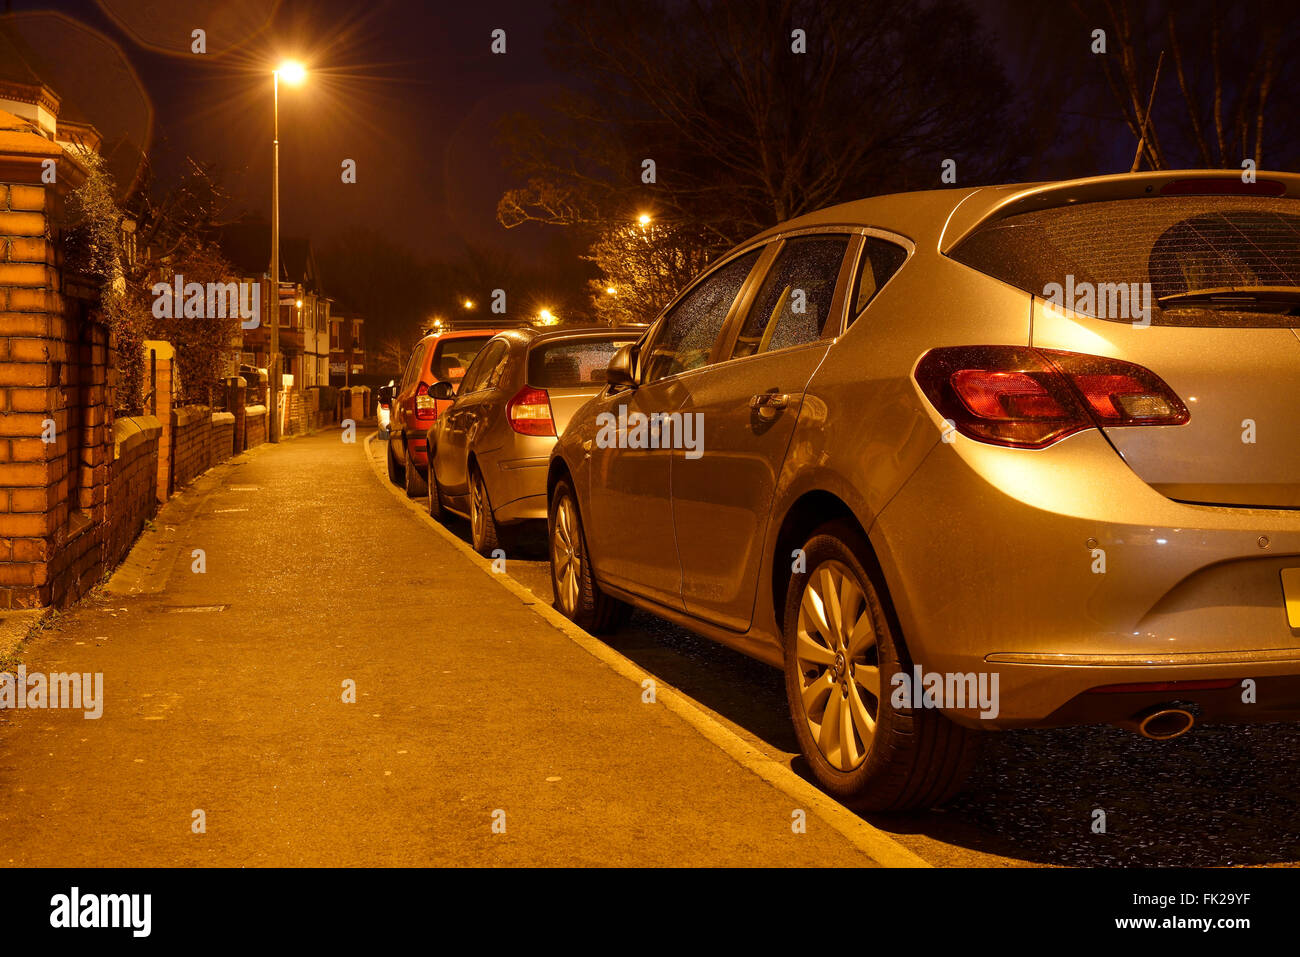 Cars parked on the side of a road at night Stock Photo